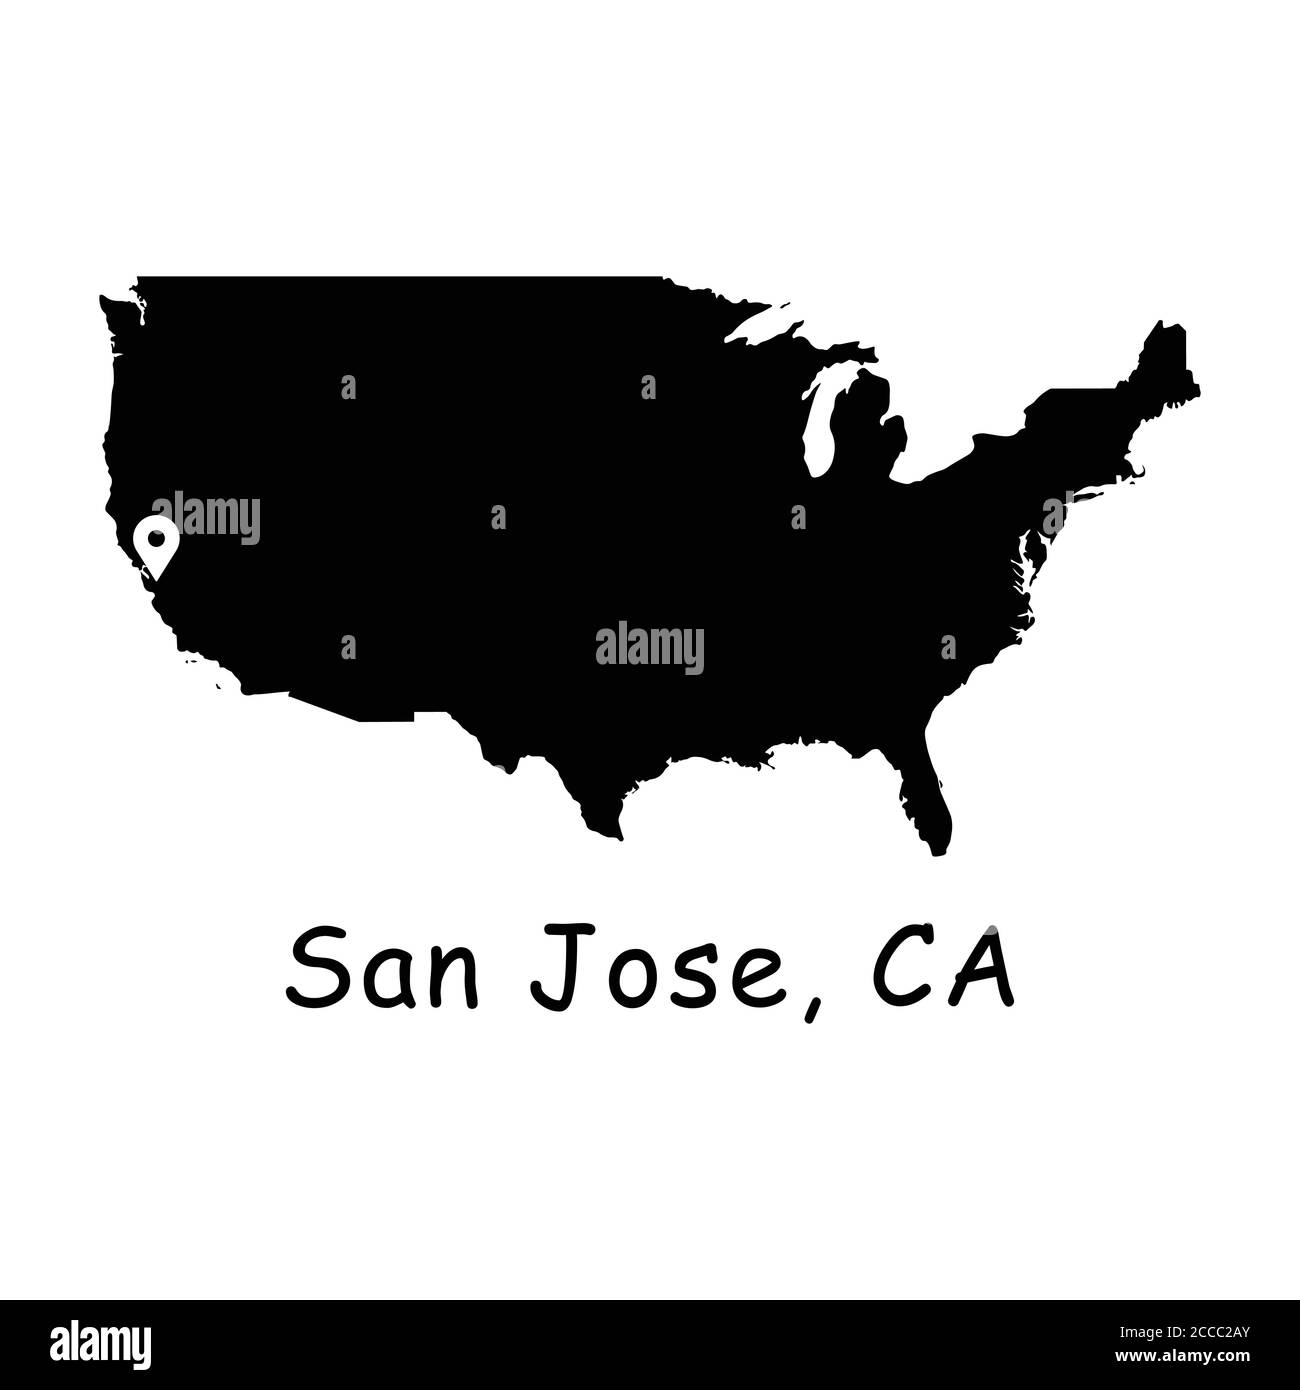 San Jose City California on USA Map. Detailed America Country Map with Location Pin on San Jose CA. Black silhouette vector maps isolated on white bac Stock Vector